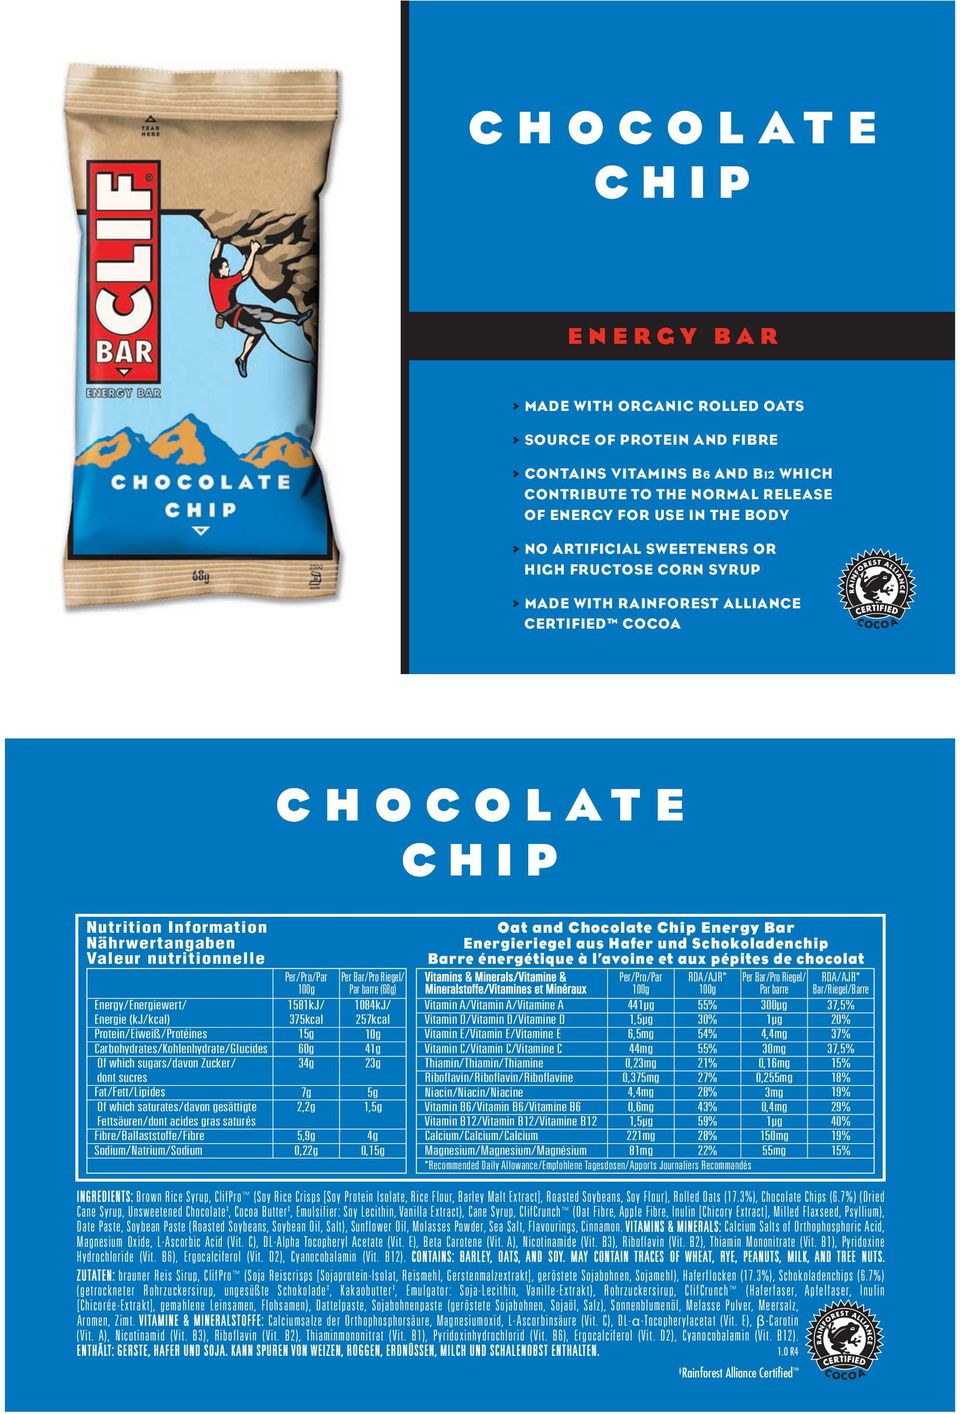 INGREDIENTS: Brown Rice Syrup, ClifPro (Soy Rice Crisps [Soy Protein Isolate, Rice Flour, Barley Malt Extract], Roasted Soybeans, Soy Flour), Rolled Oats (17.3%), Chocolate Chips (6.